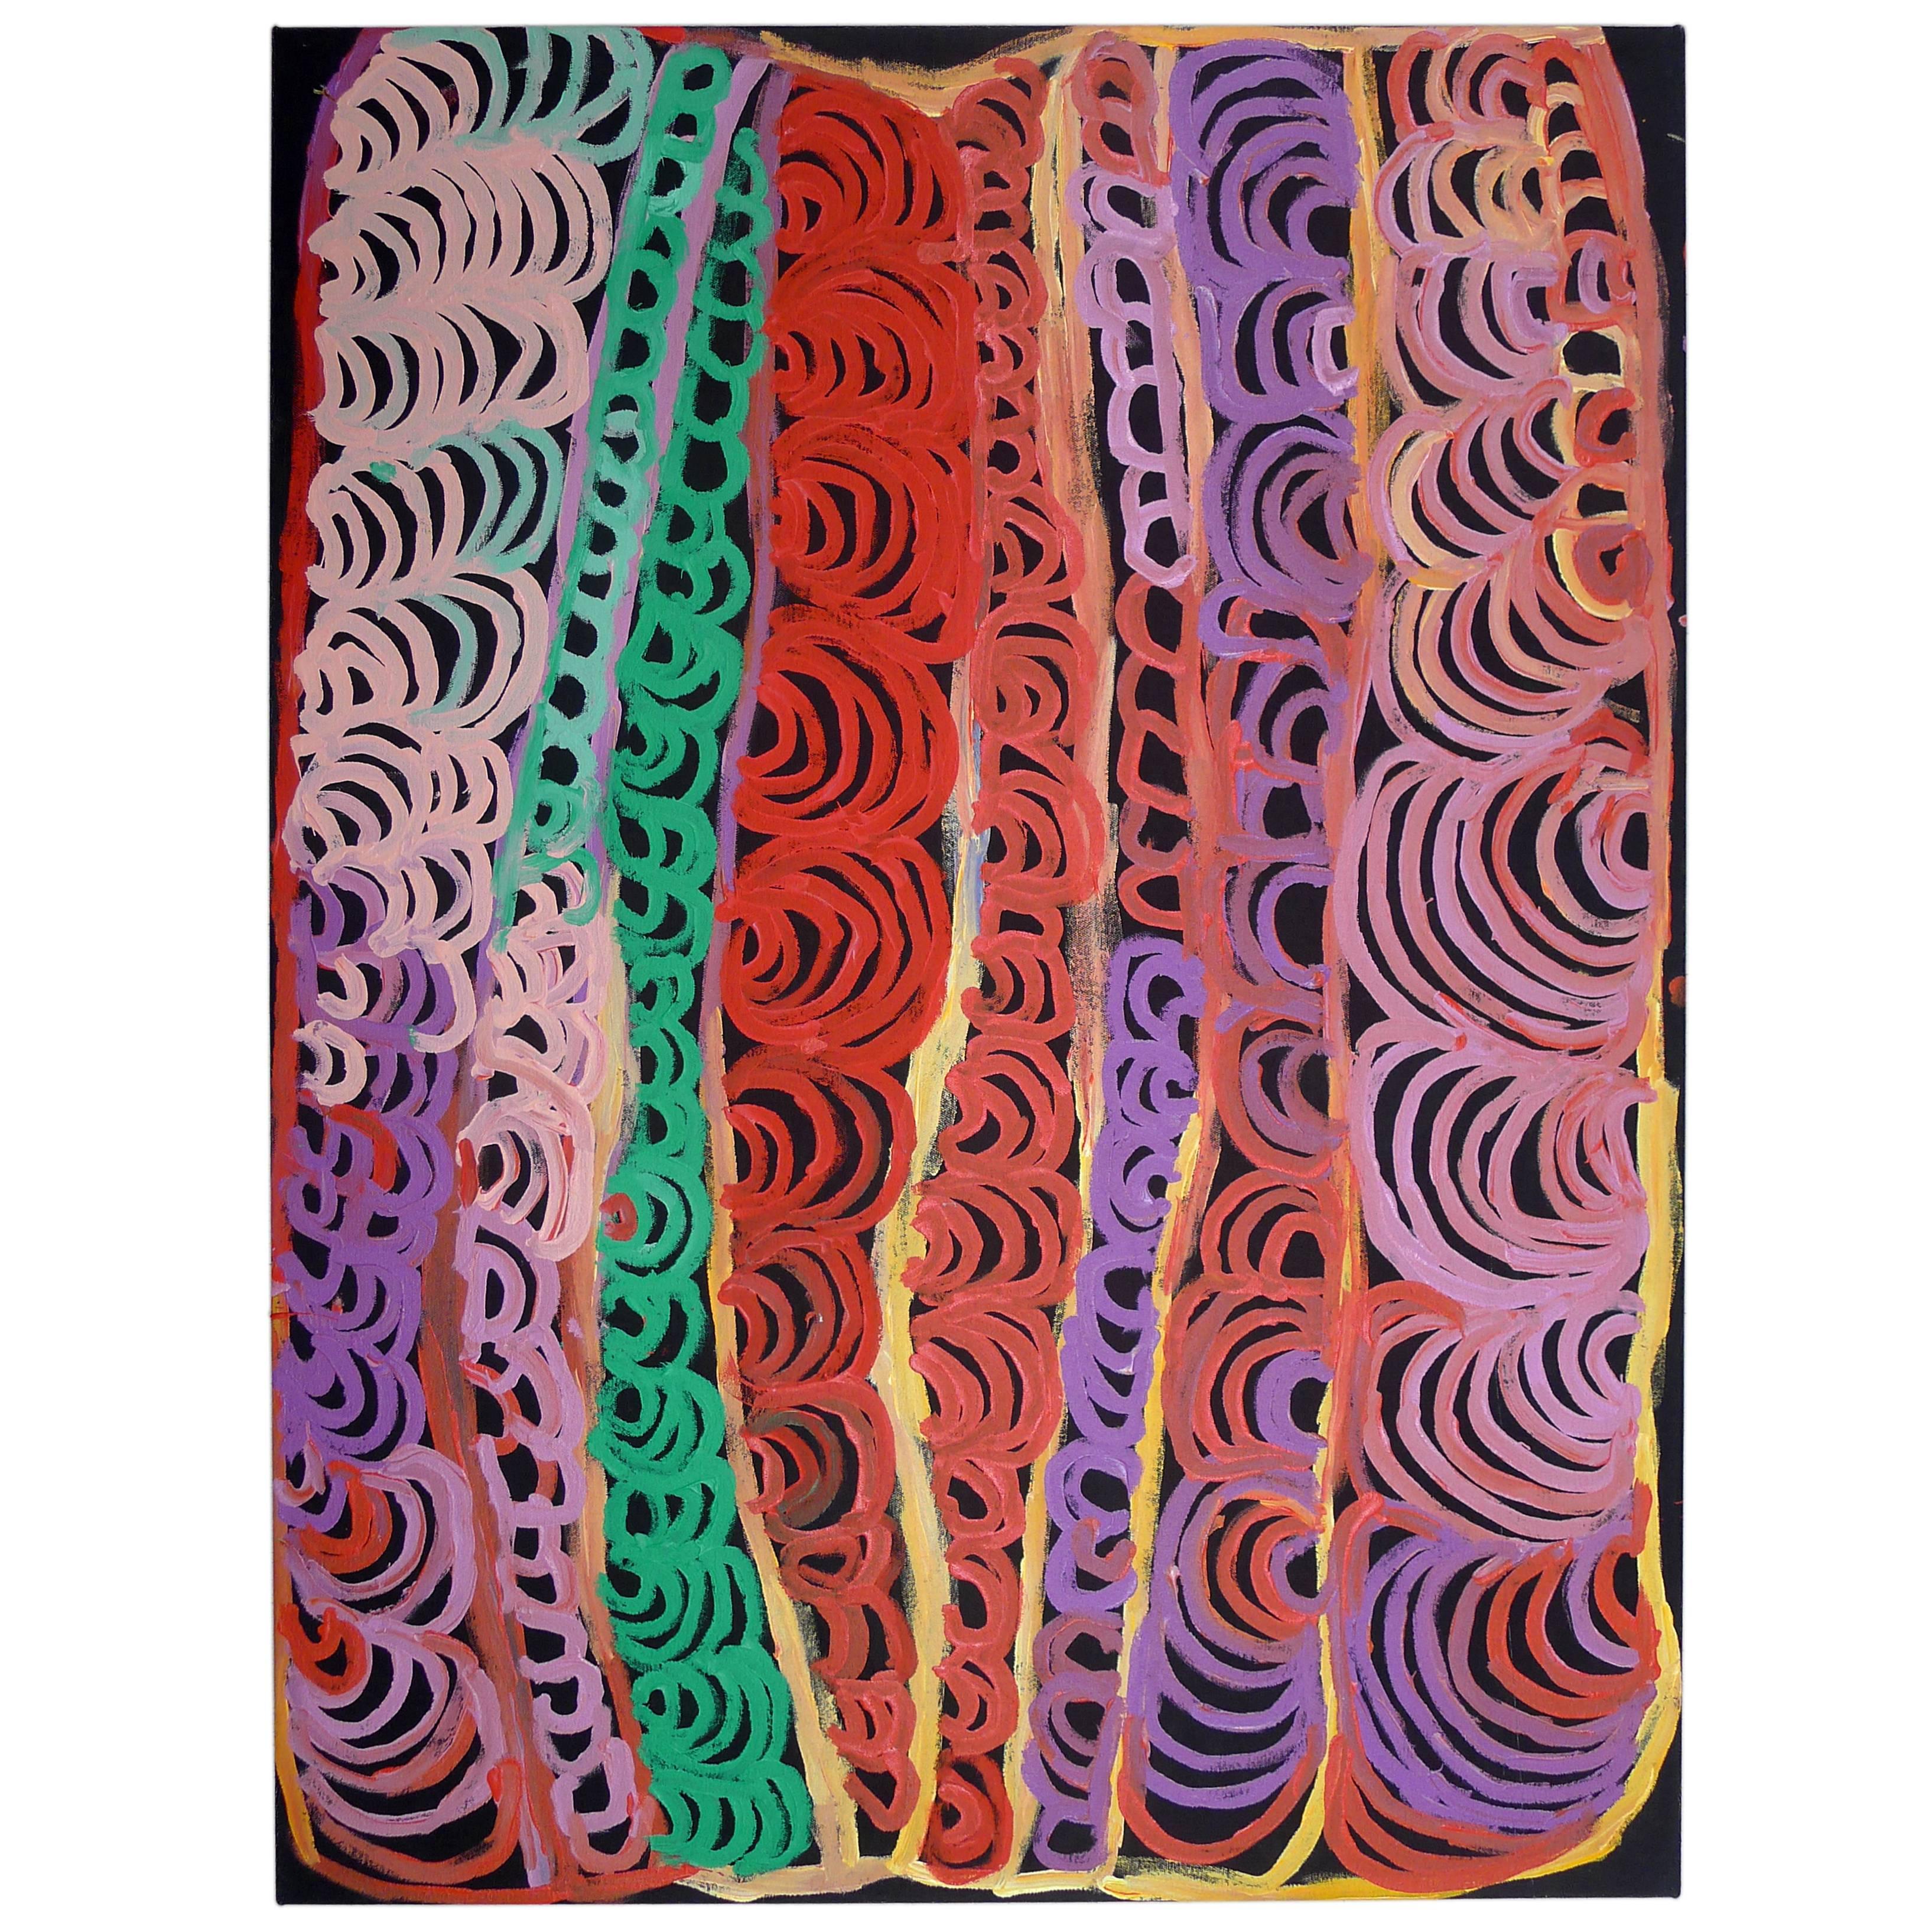 Brightly Colored Australian Aboriginal Acrylic Painting on Canvas